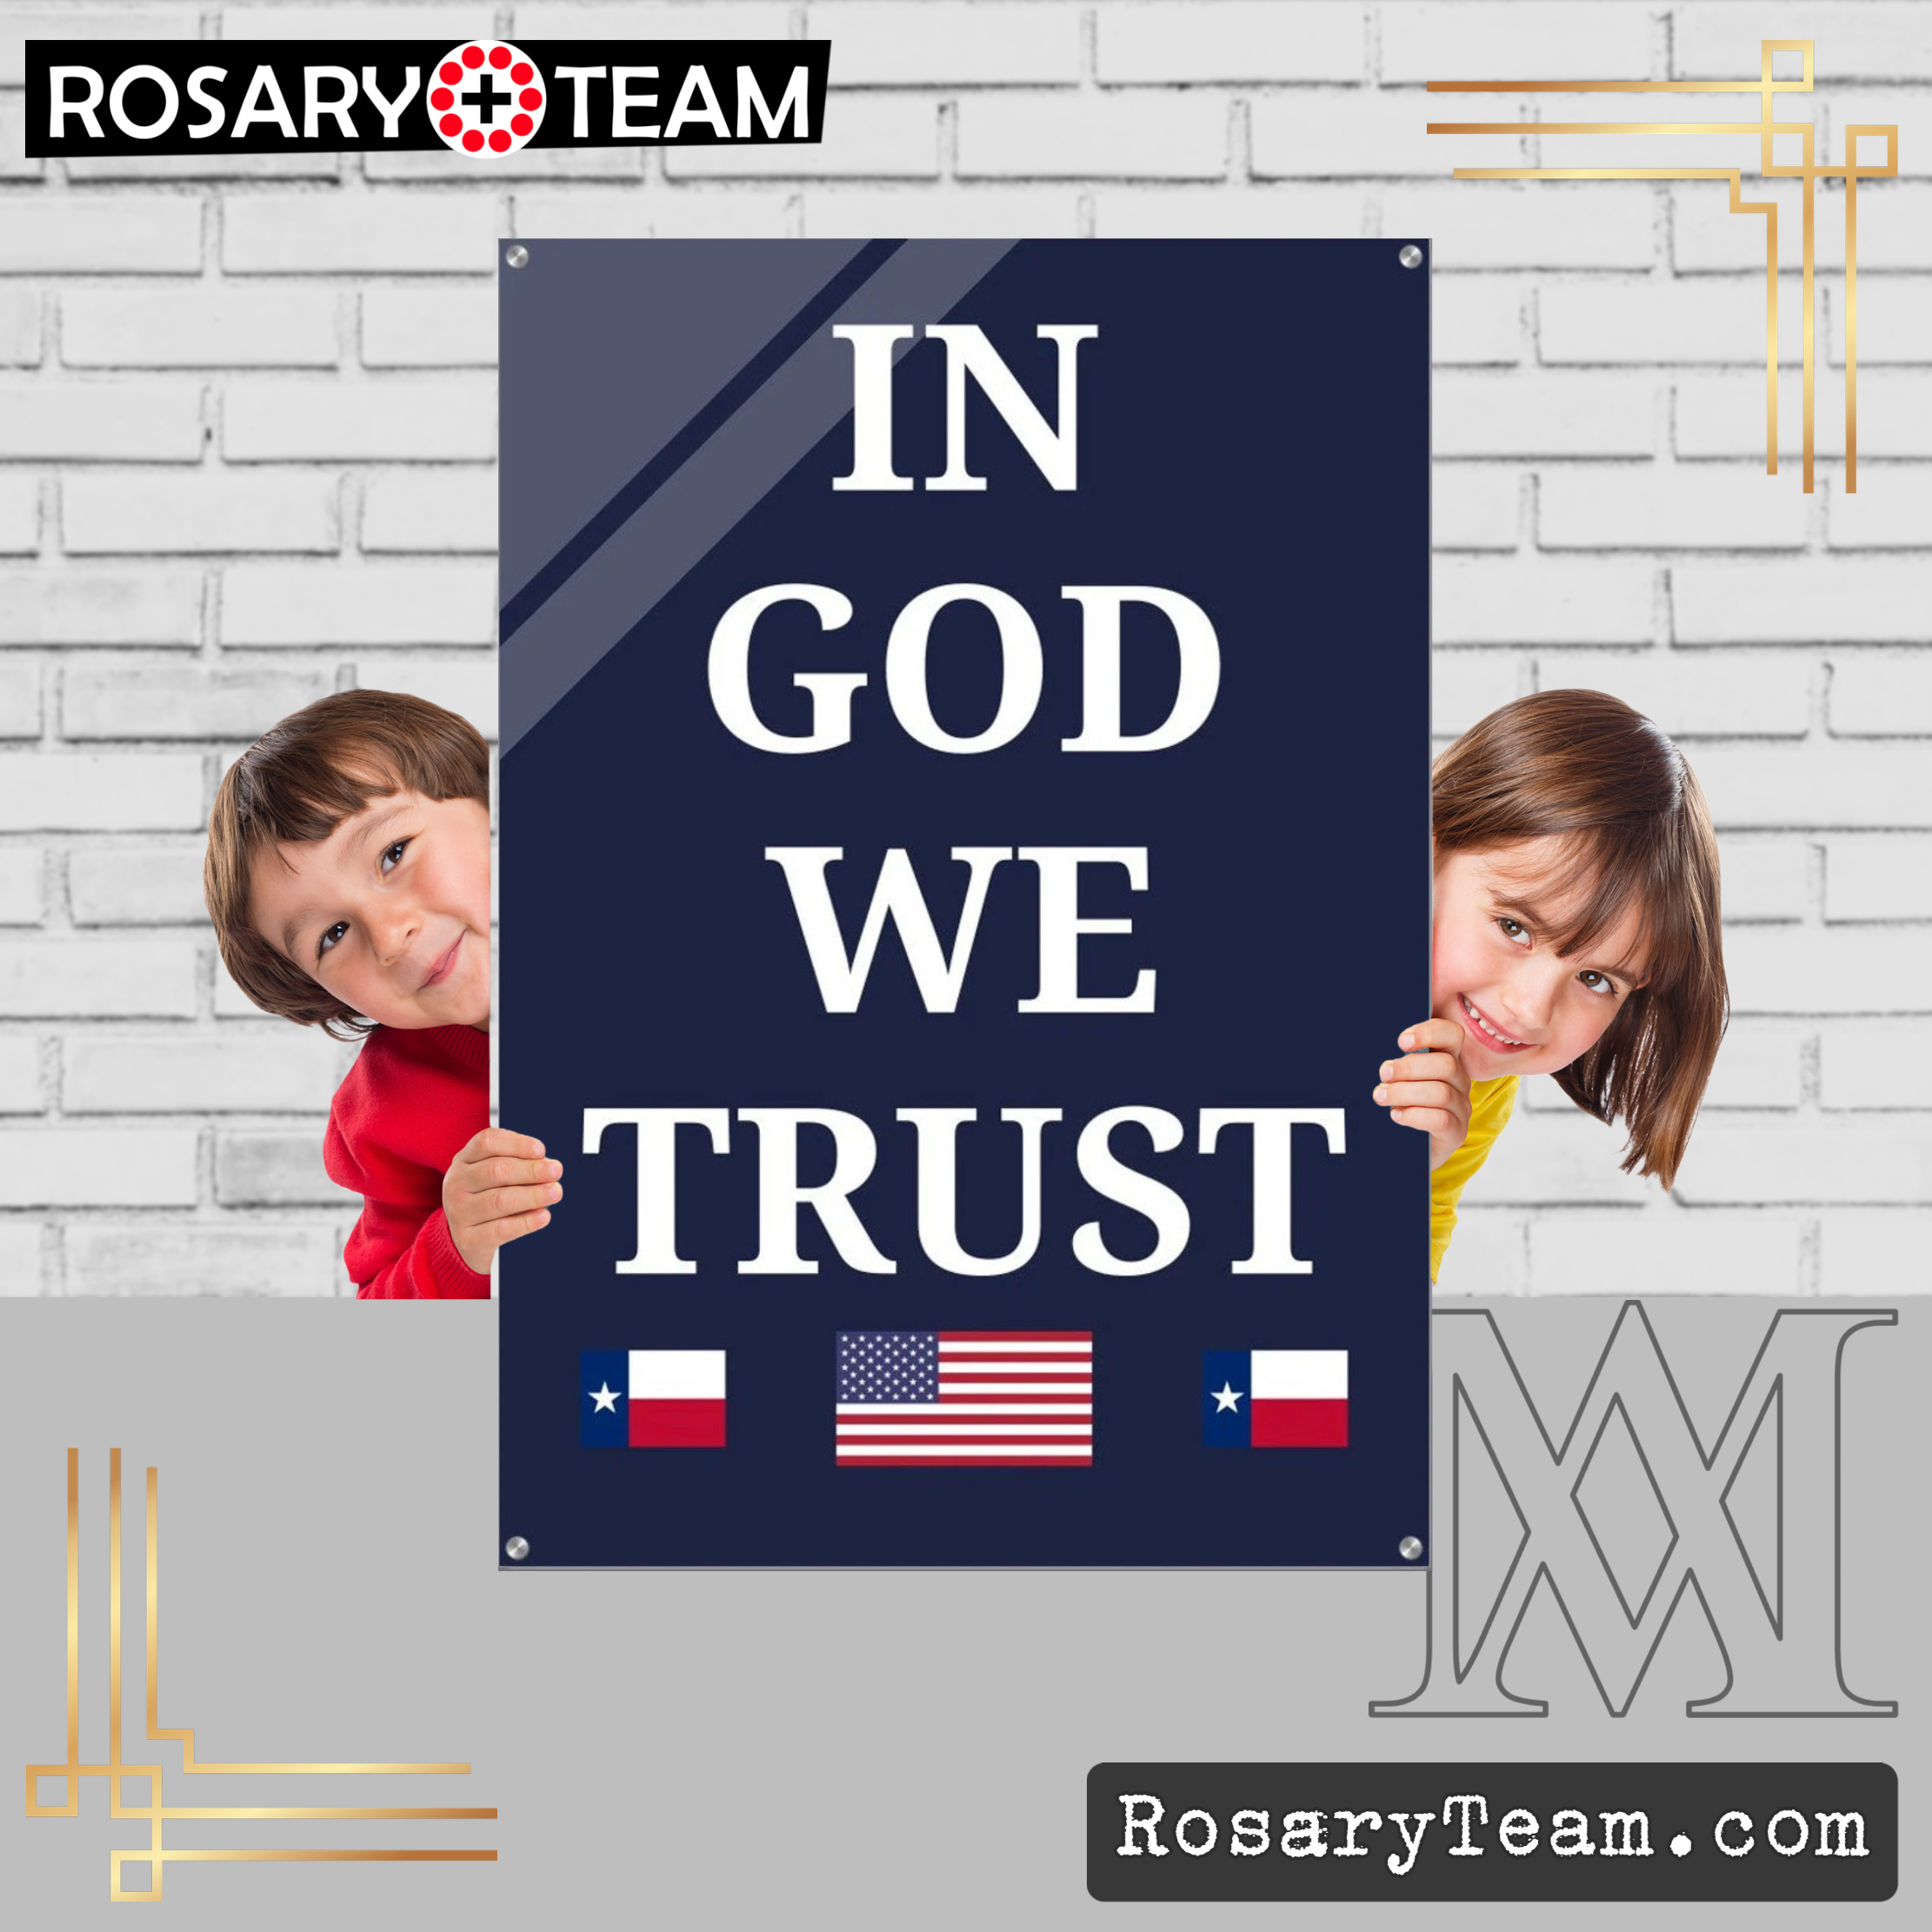 In God We Trust Premium Stunning Quality Acrylic Prints - With American and Texas Flag - Great to be donated to your School District